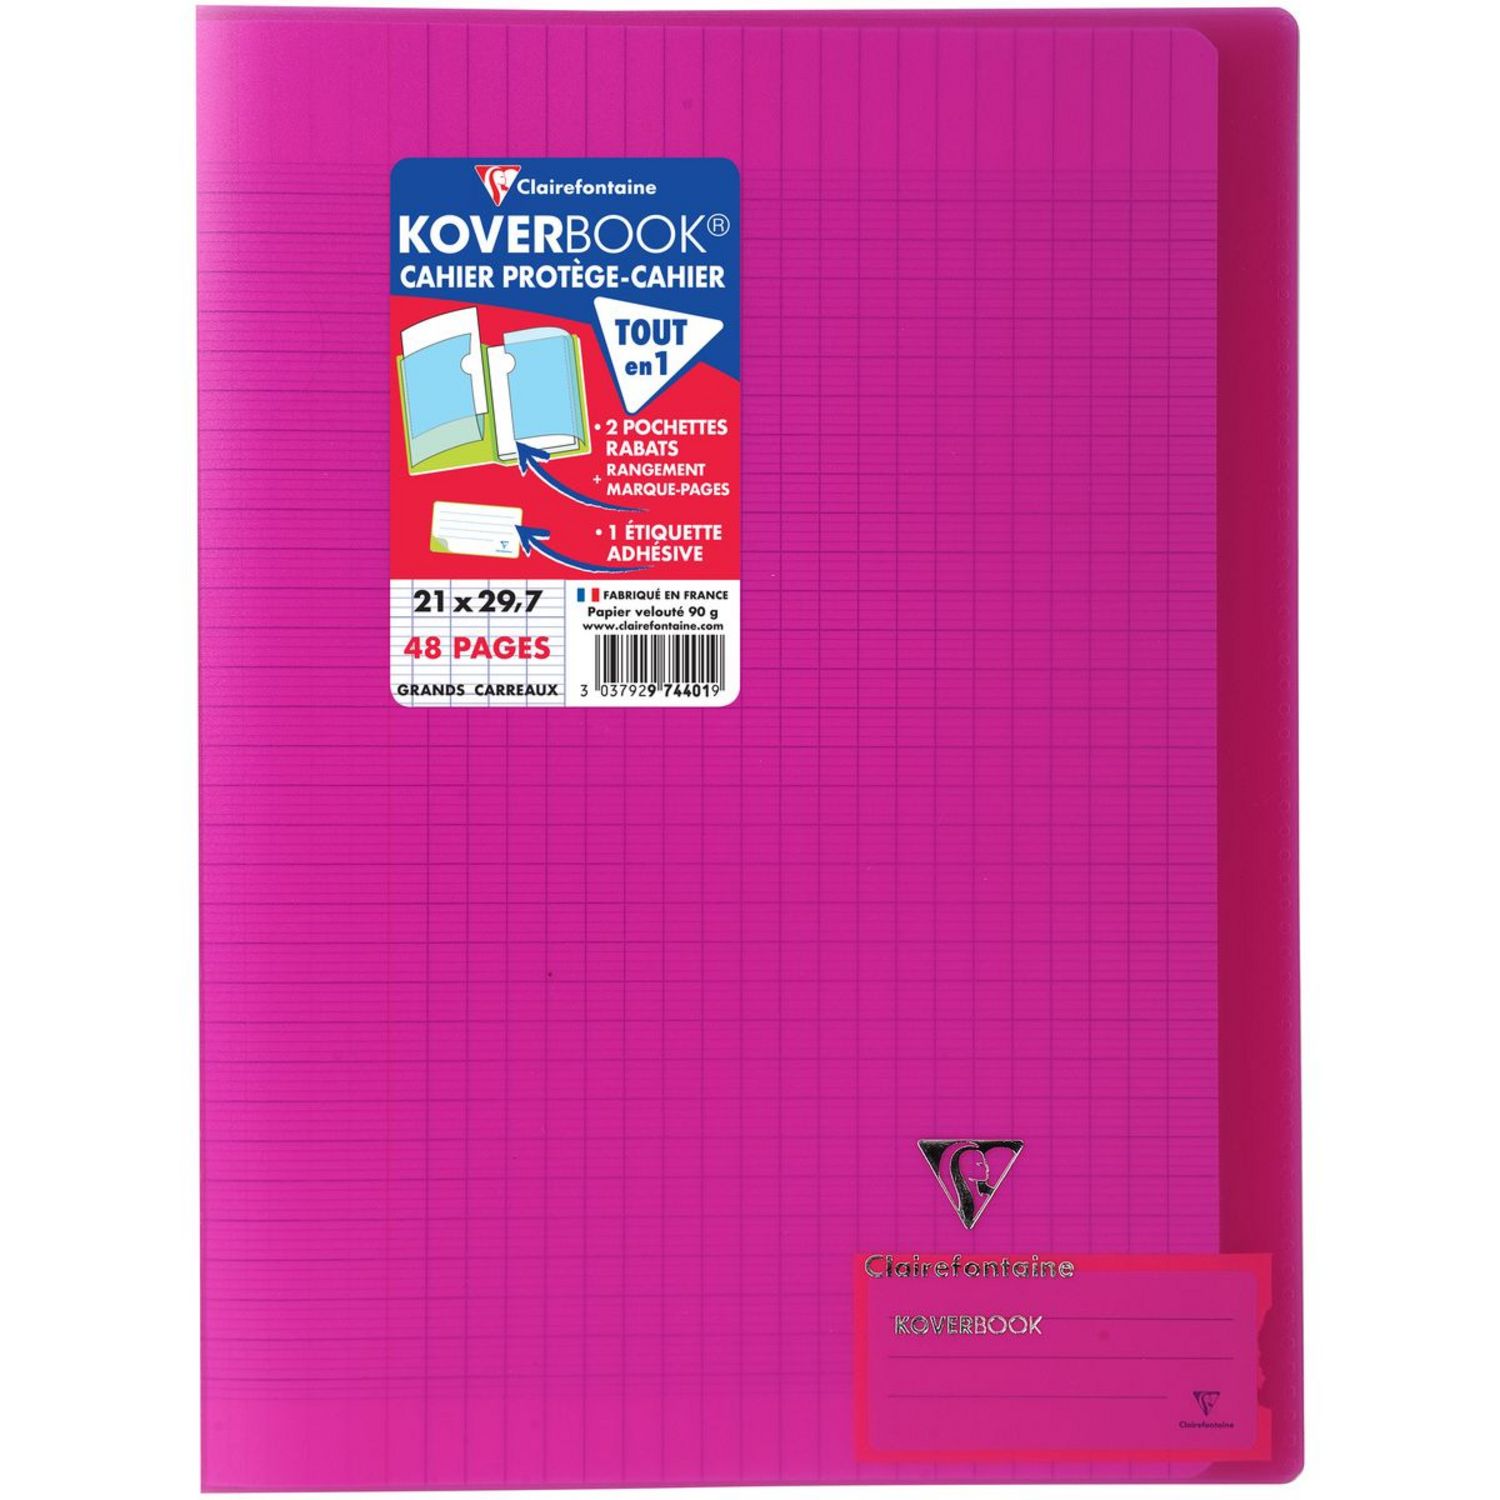 CLAIREFONTAINE Cahier polypro Koverbook 21x29,7cm 48 pages grands carreaux  Seyes translucide rose pas cher 